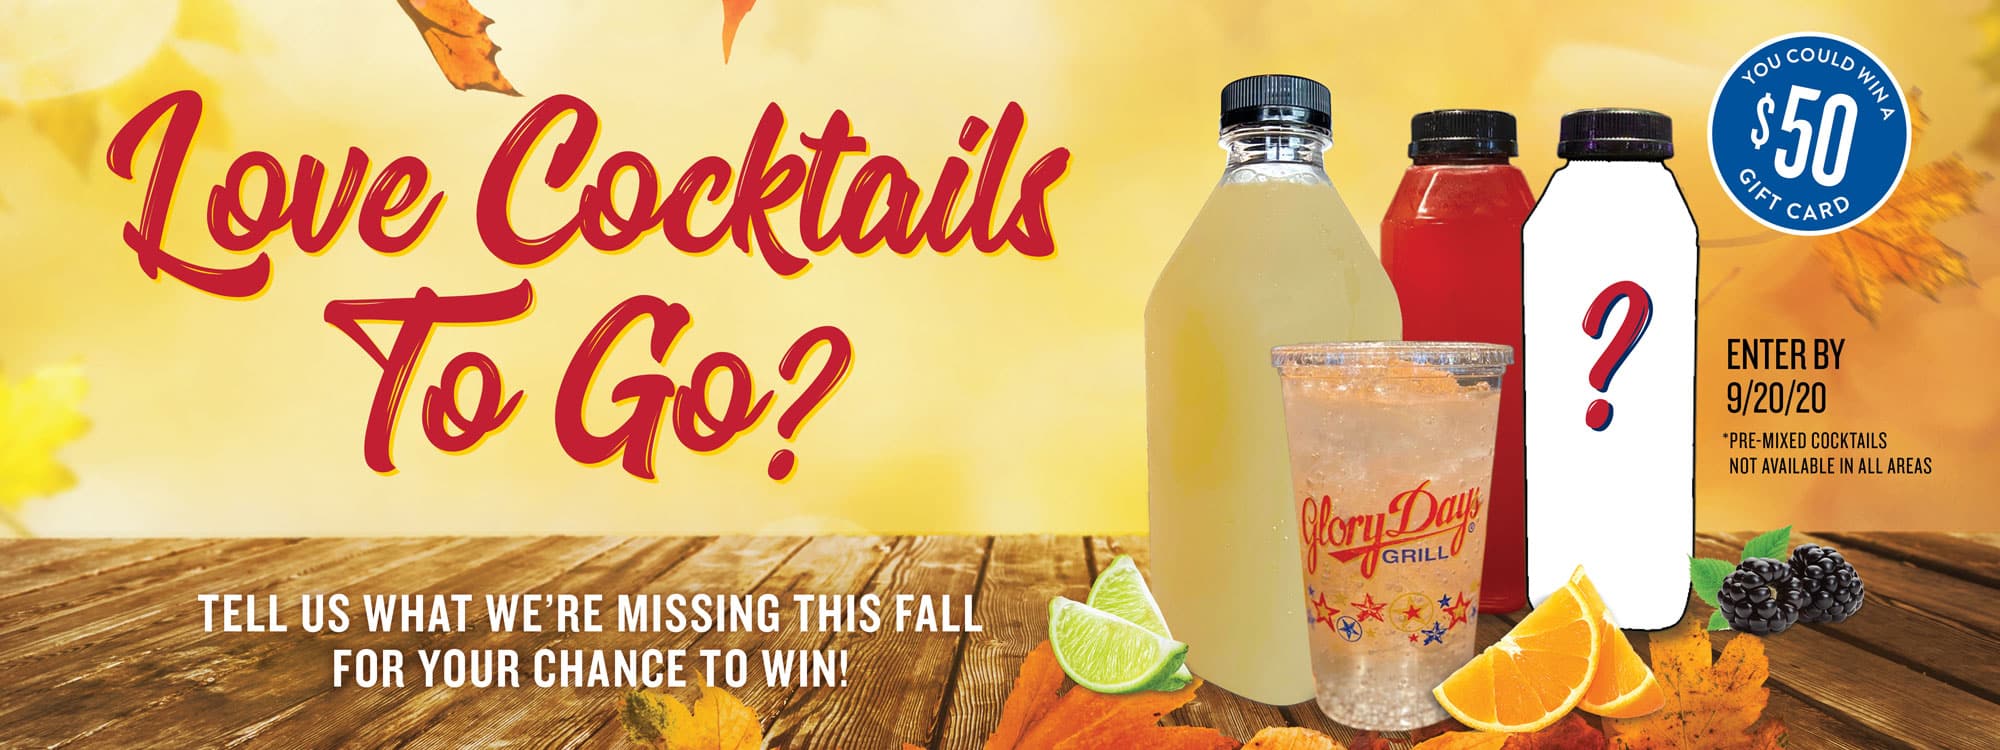 Love Cocktails to Go? Tell us what we're missing for a chance to win a $50 gift card.